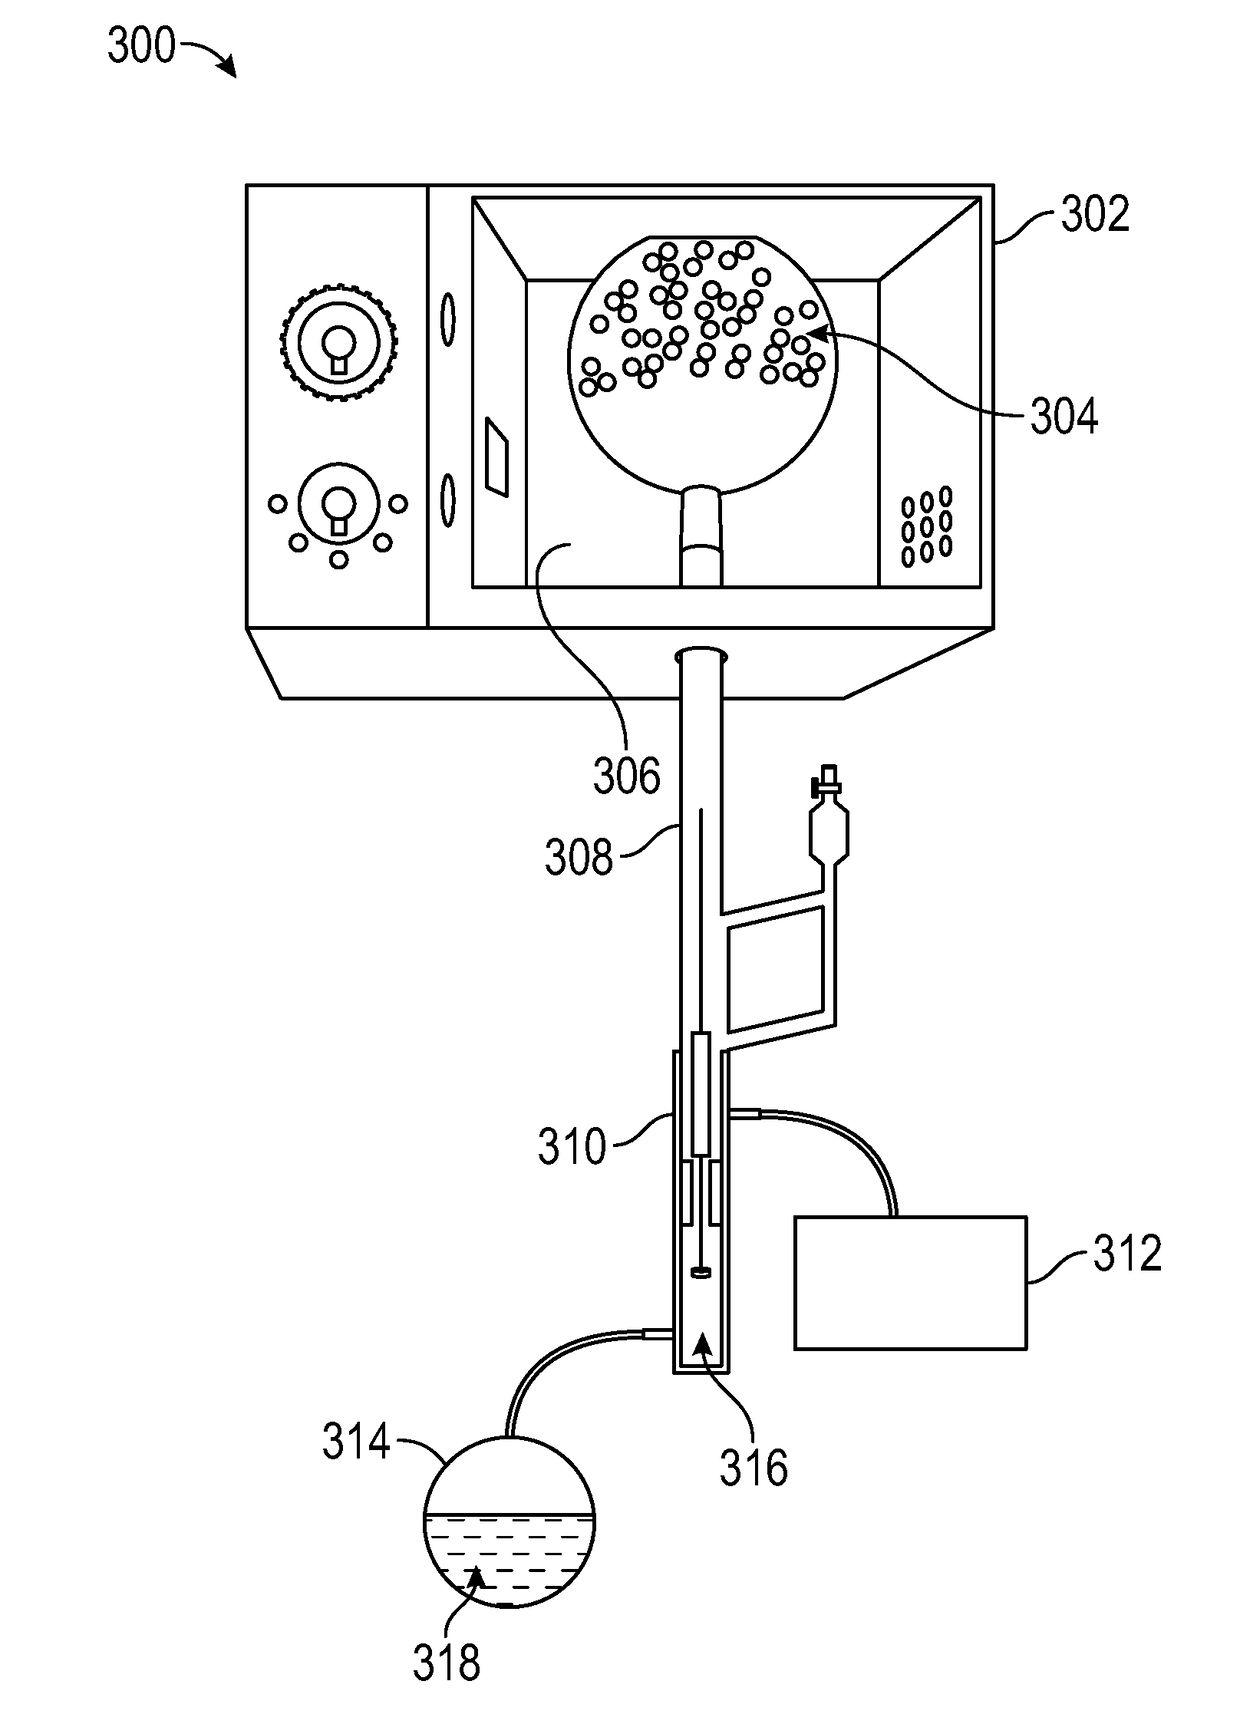 Apparatus for preparation of pharmacologically-relevant compounds from botanical sources